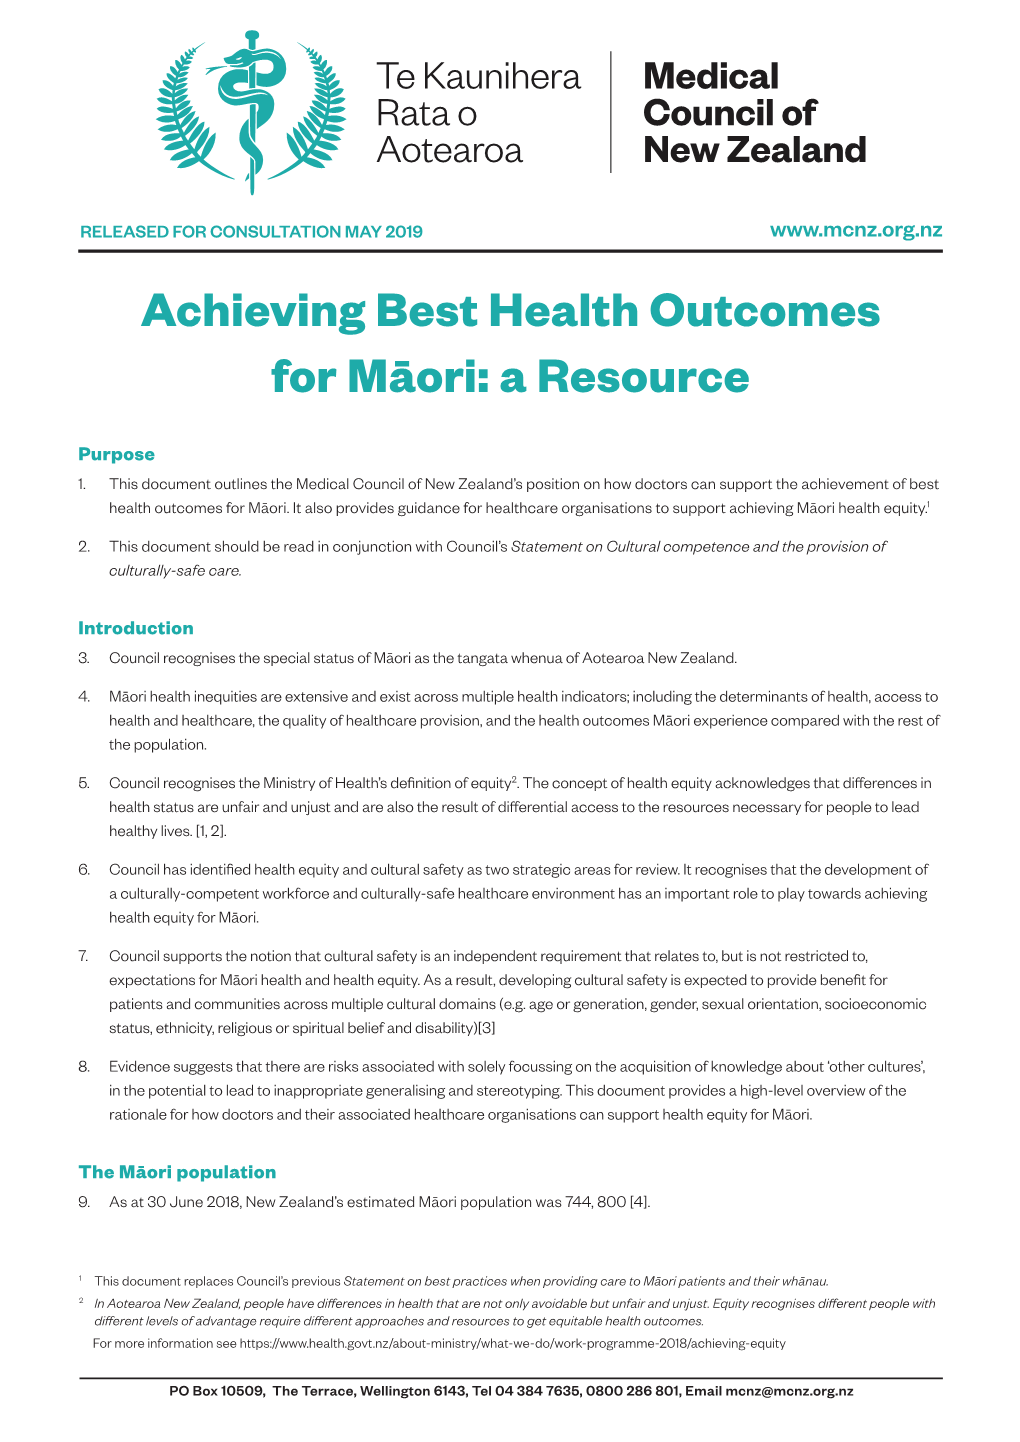 Achieving Best Health Outcomes for Māori: a Resource